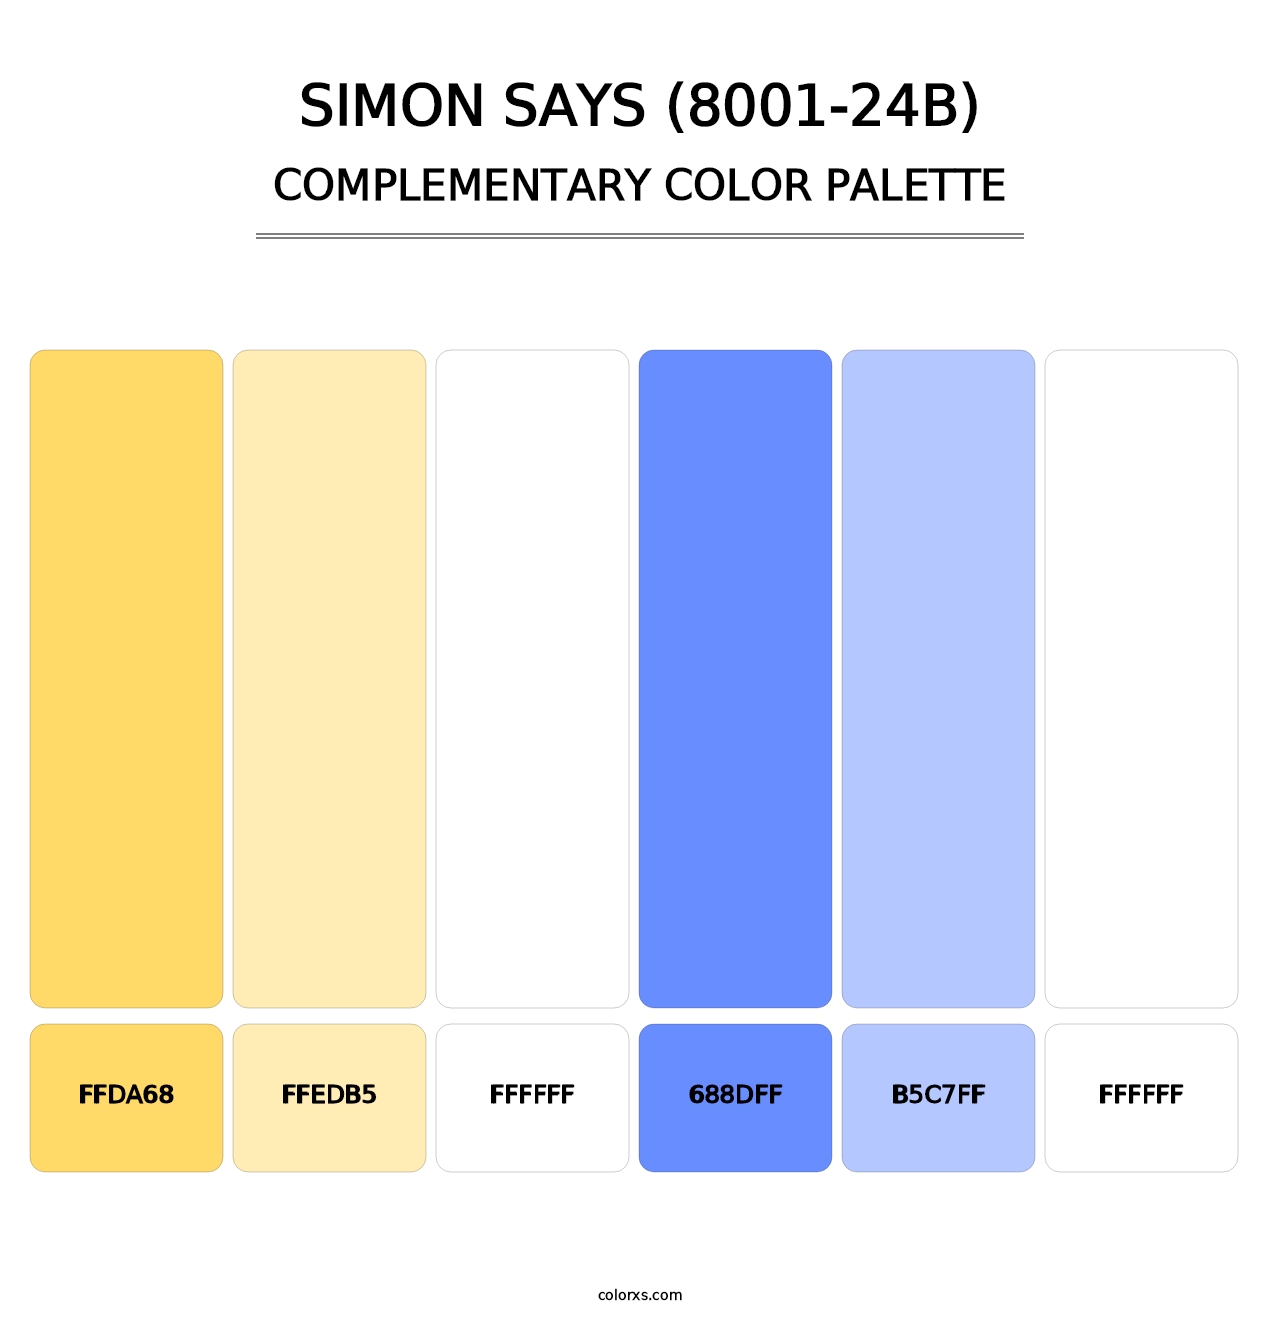 Simon Says (8001-24B) - Complementary Color Palette